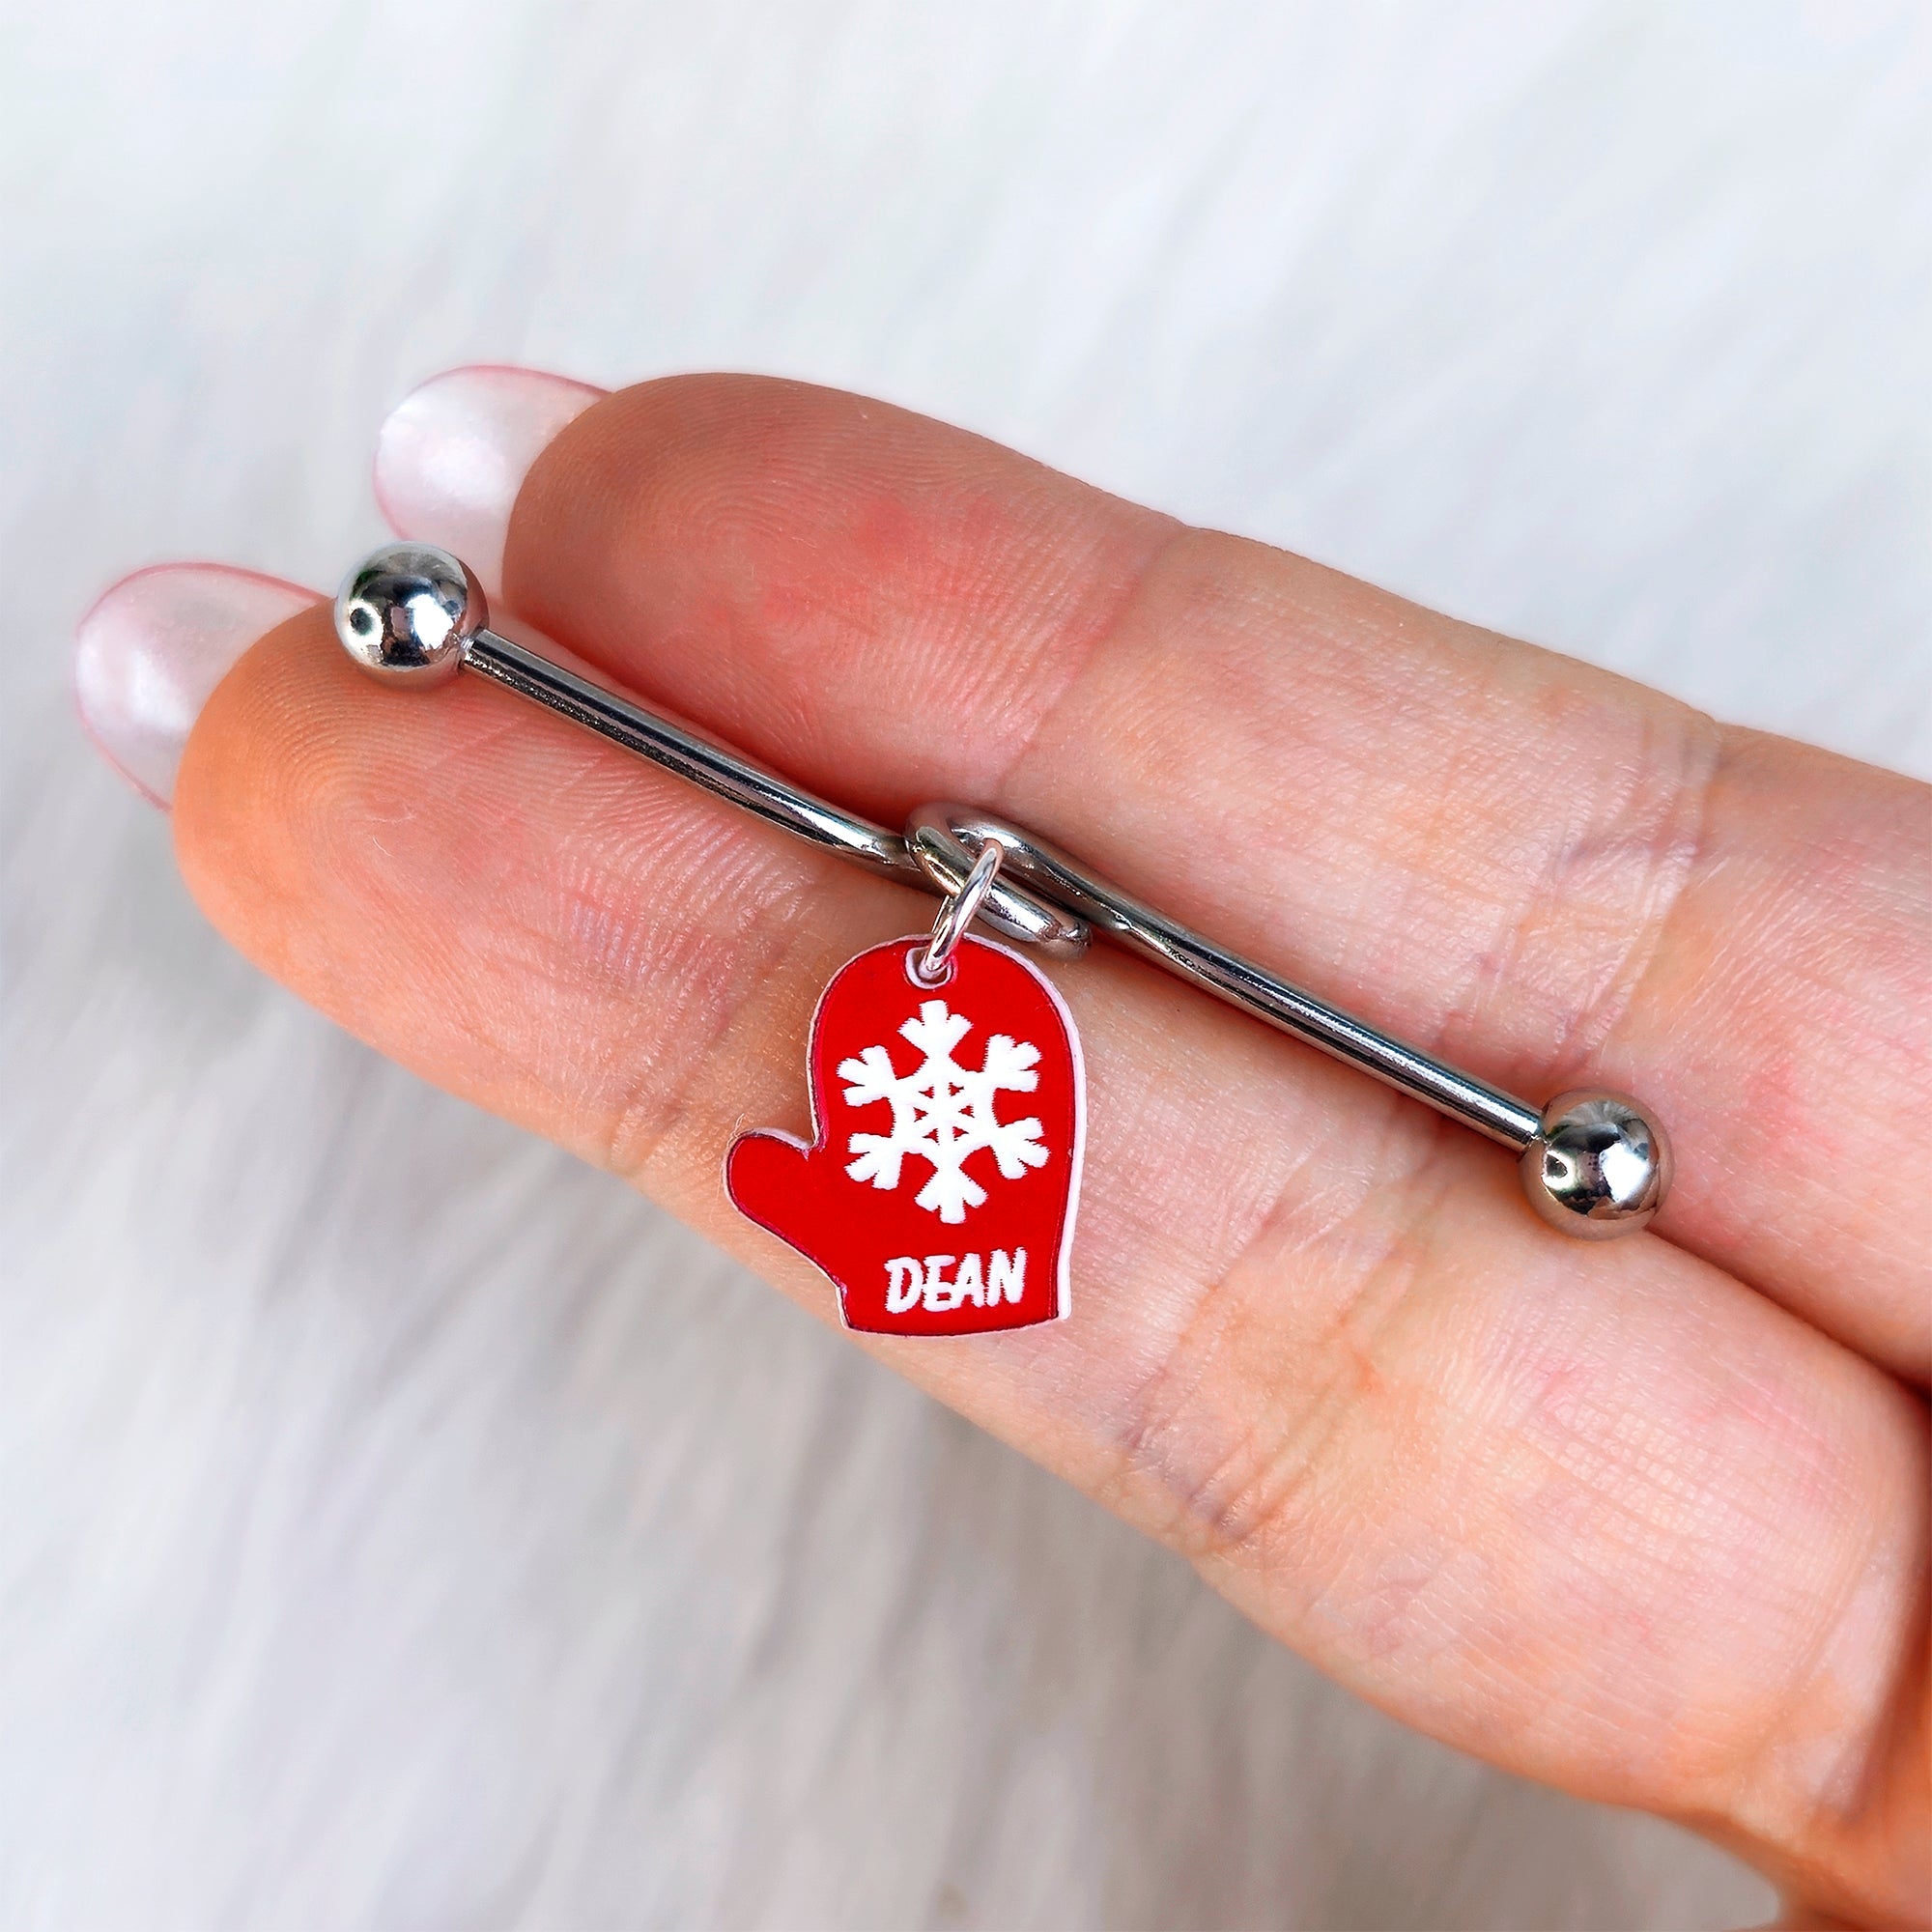 Custom Holiday Mitten Personalized Industrial Barbell (More Colors)